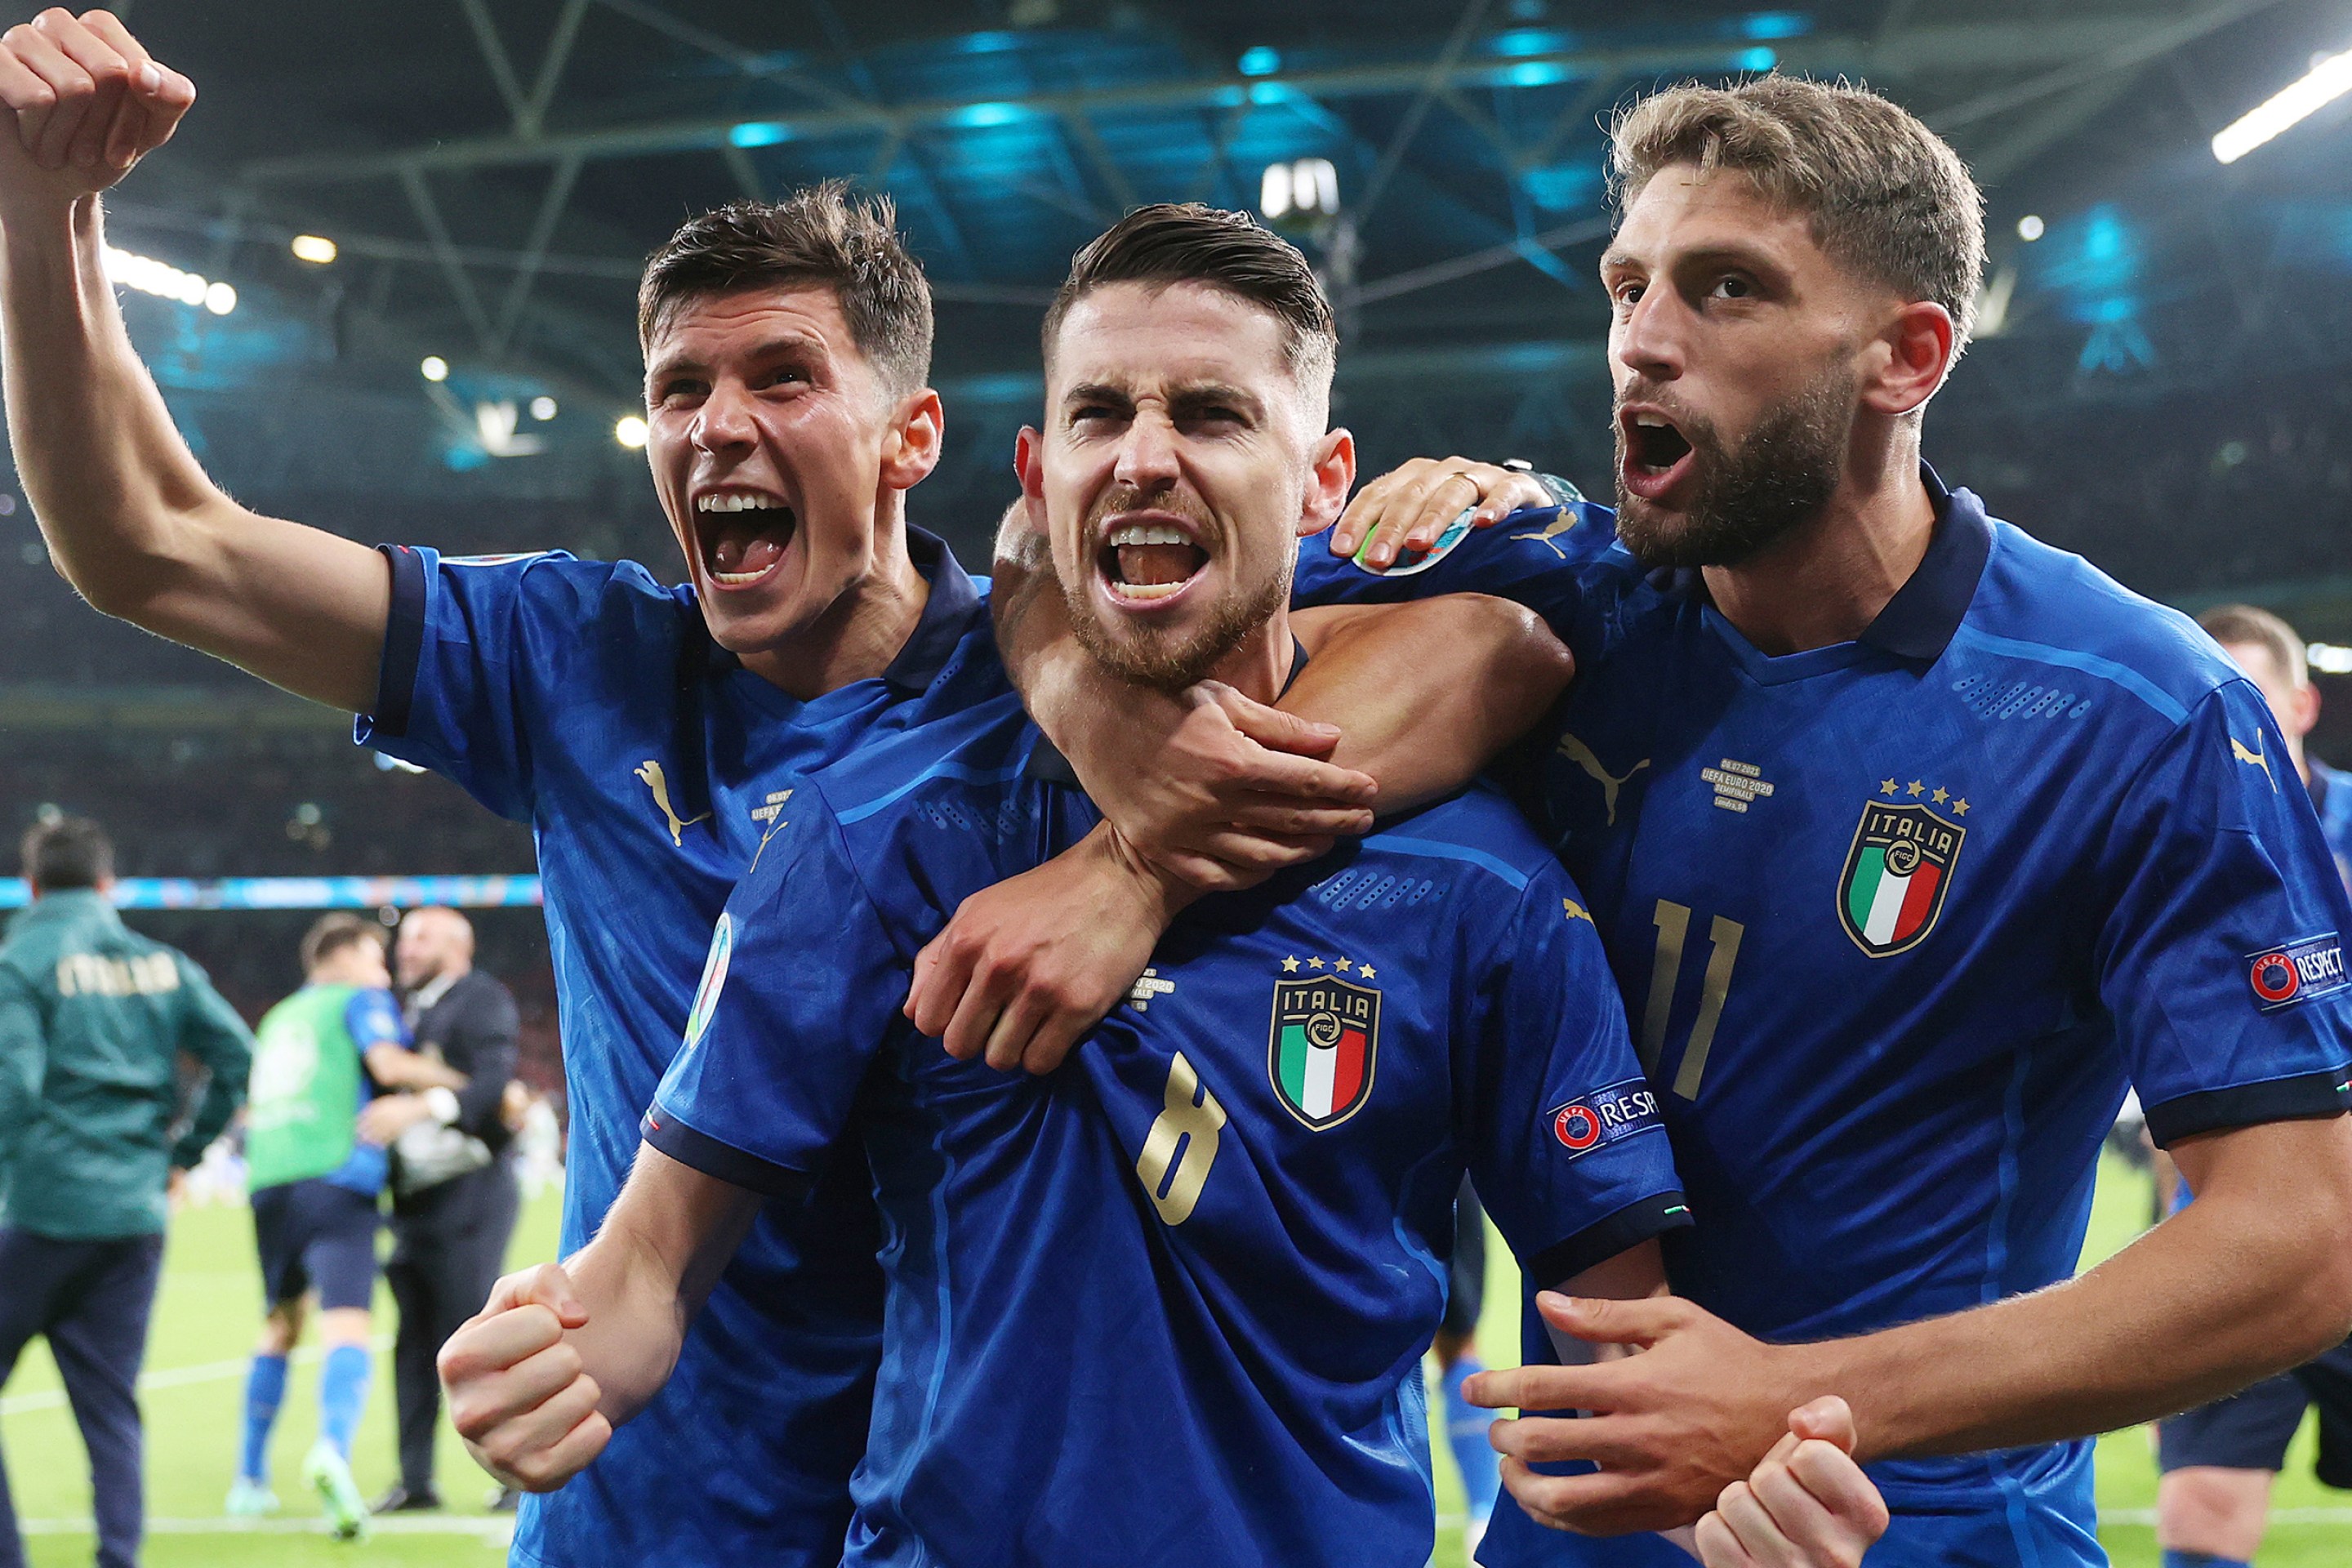 Jorginho of Italy celebrates with Matteo Pessina and Domenico Berardi after scoring their sides winning penalty in the penalty shoot out during the UEFA Euro 2020 Championship Semi-final match between Italy and Spain at Wembley Stadium on July 06, 2021 in London, England.